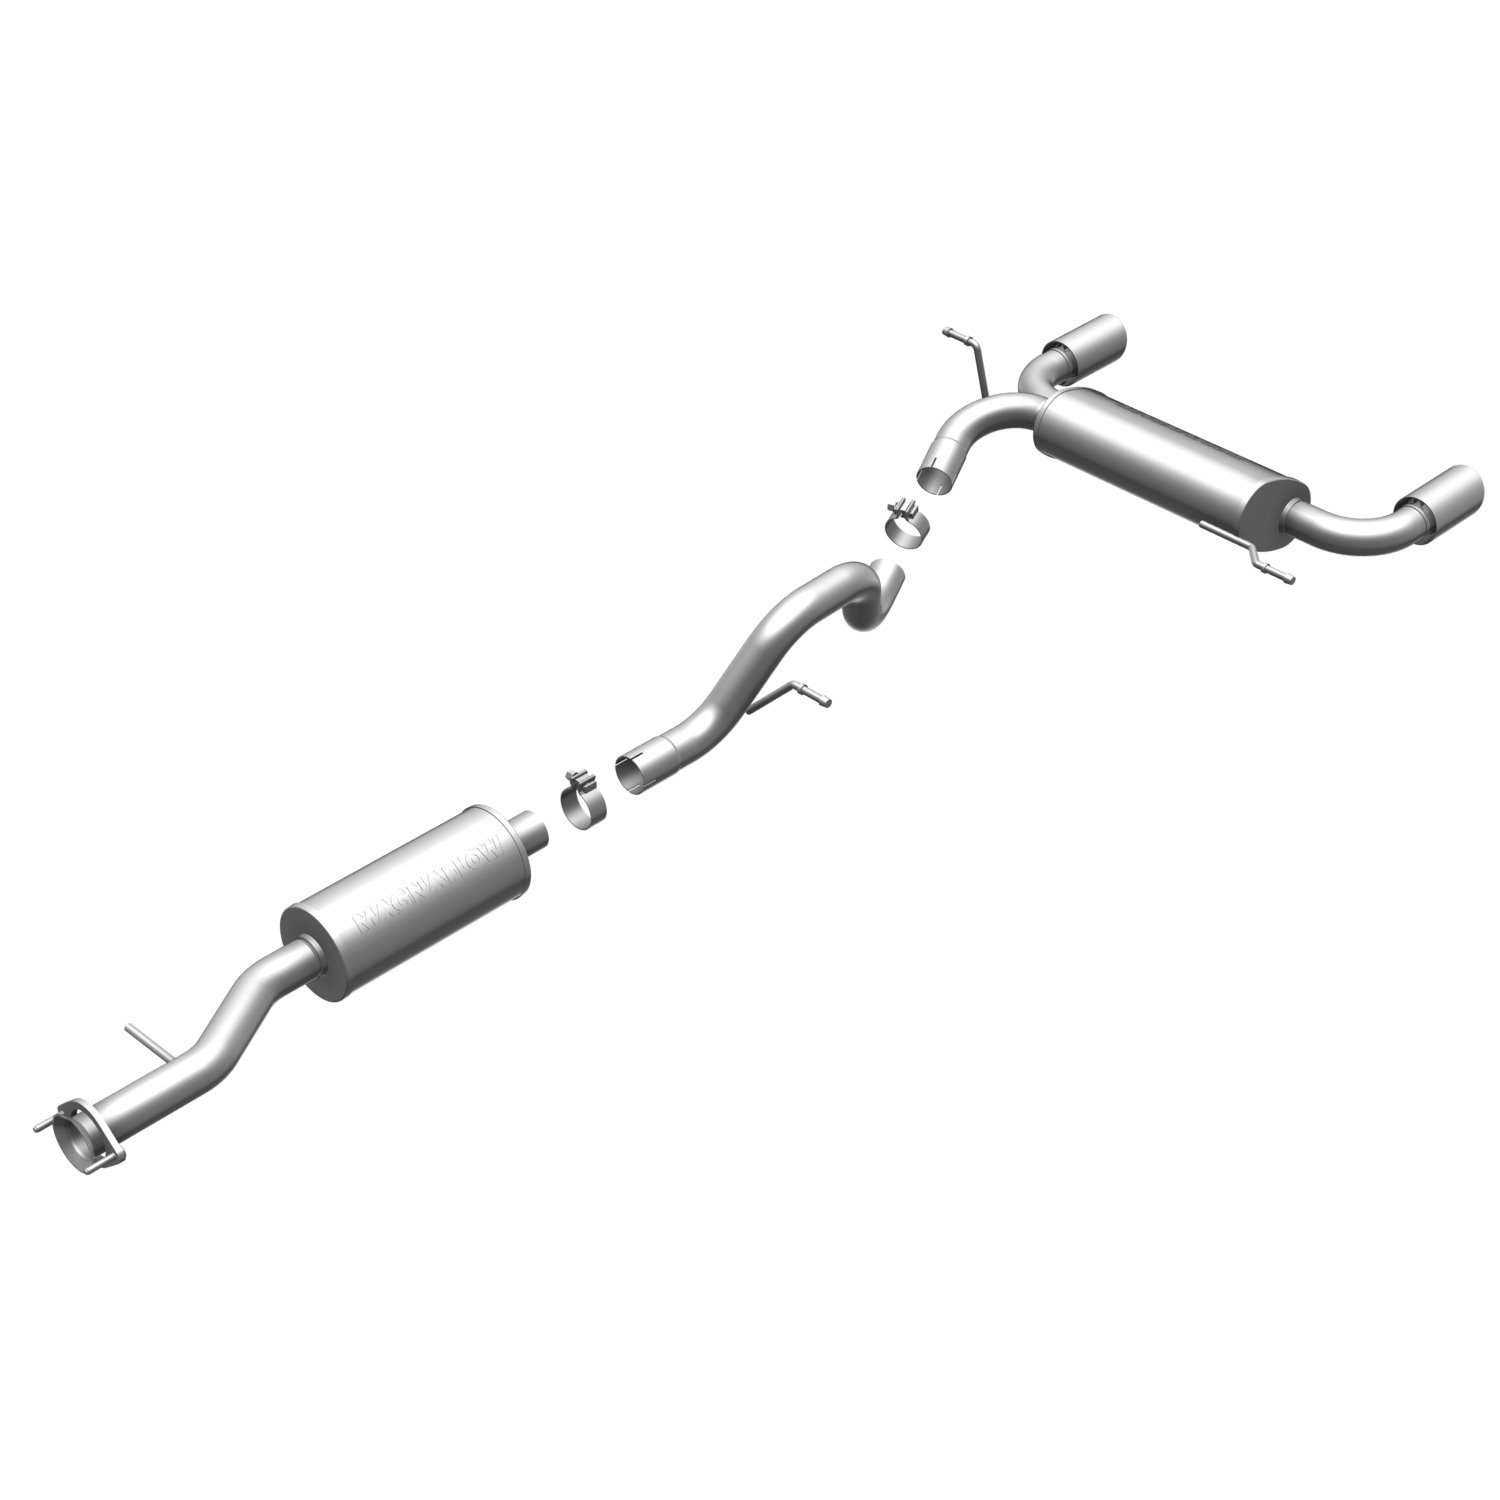 MF Series Cat-Back Exhaust System 2006-10 Hummer H3 3.5L L5